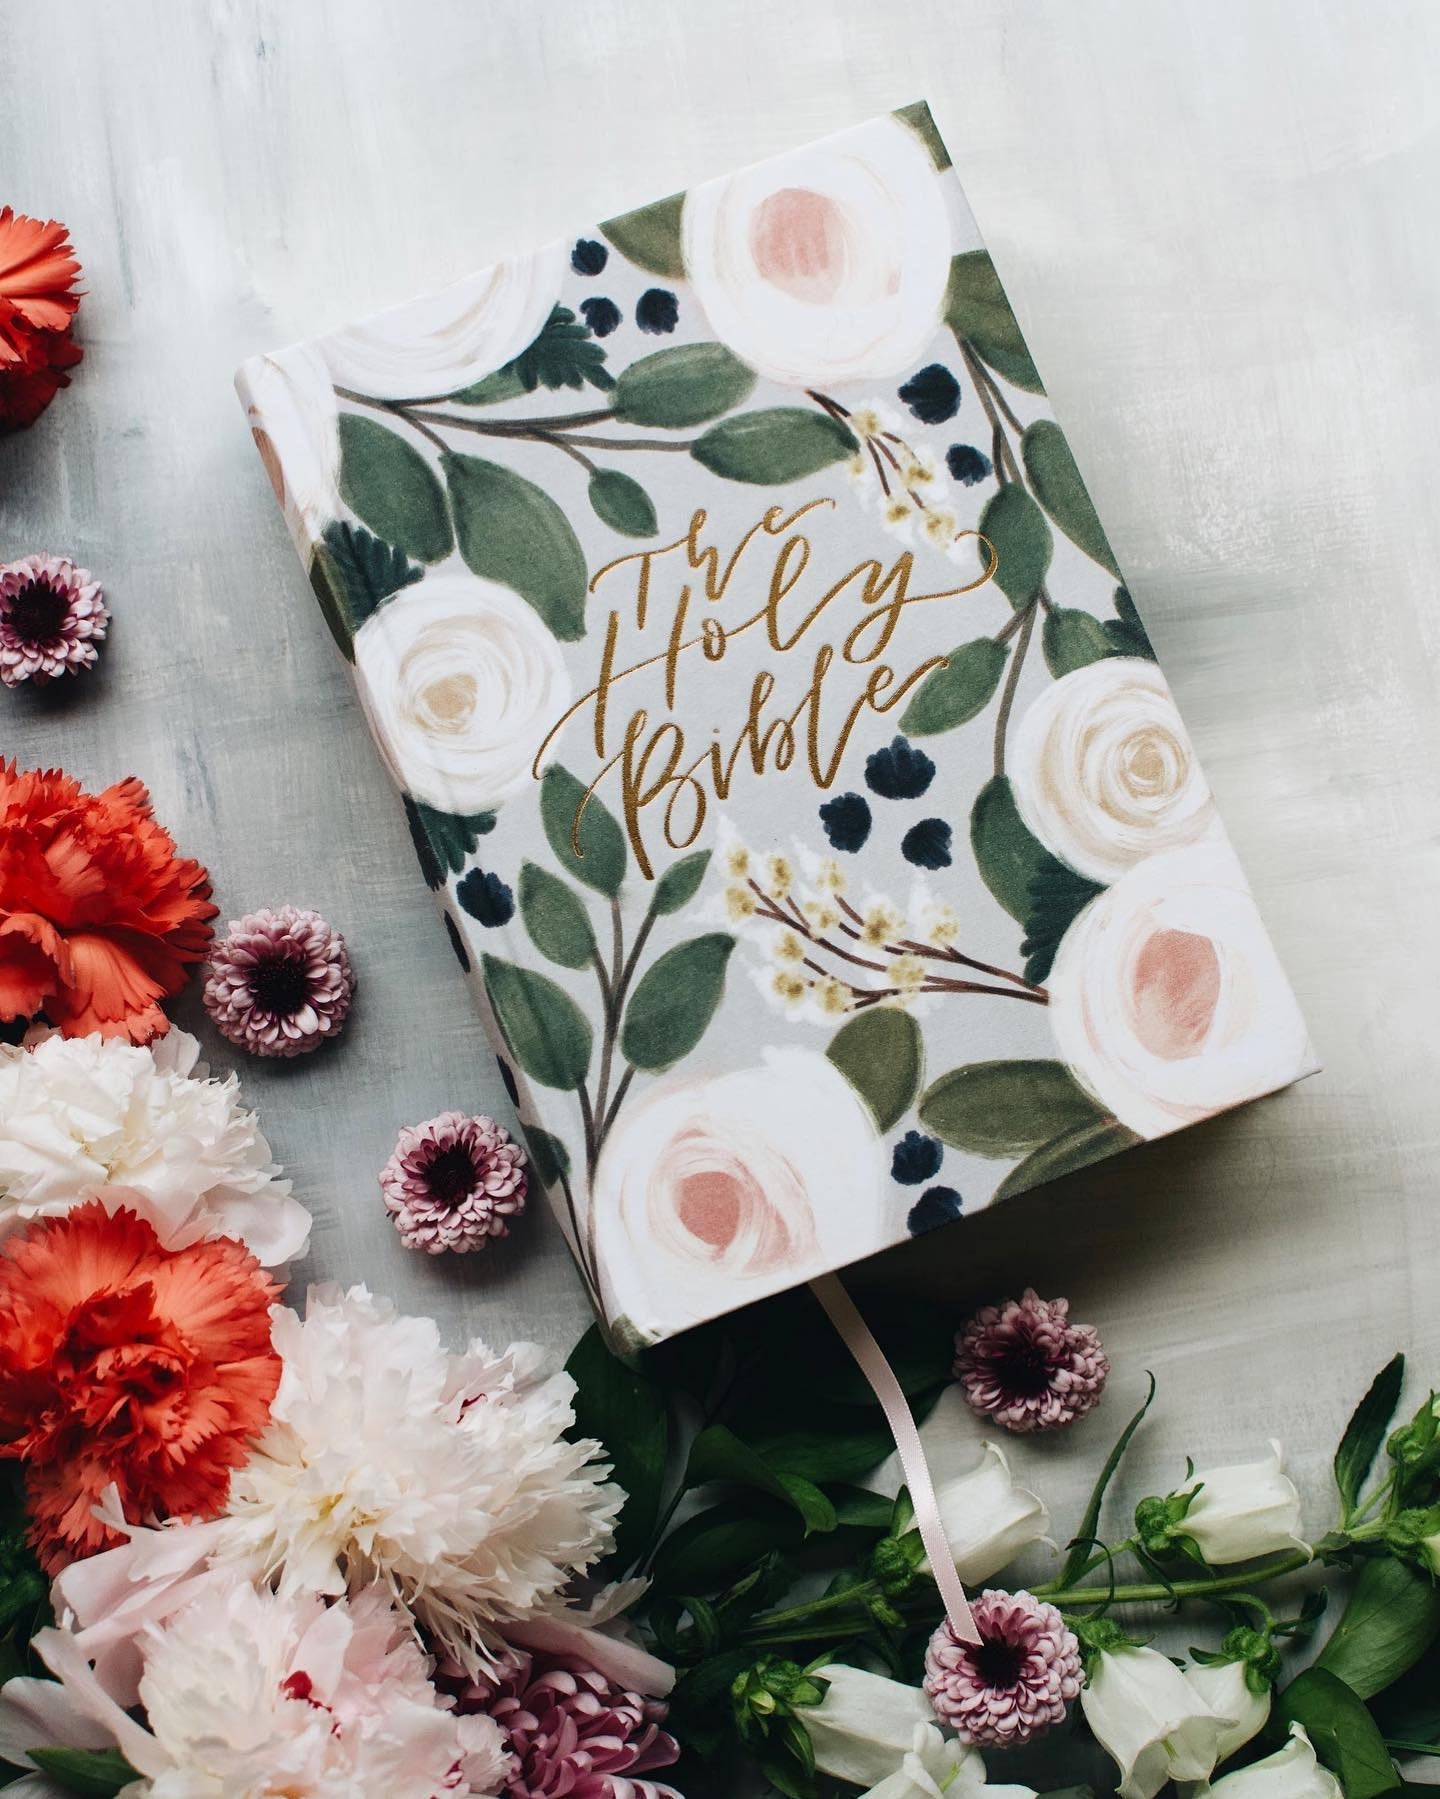 The Prayer Warrior In Your Life Will Love These Faith-Based Gifts